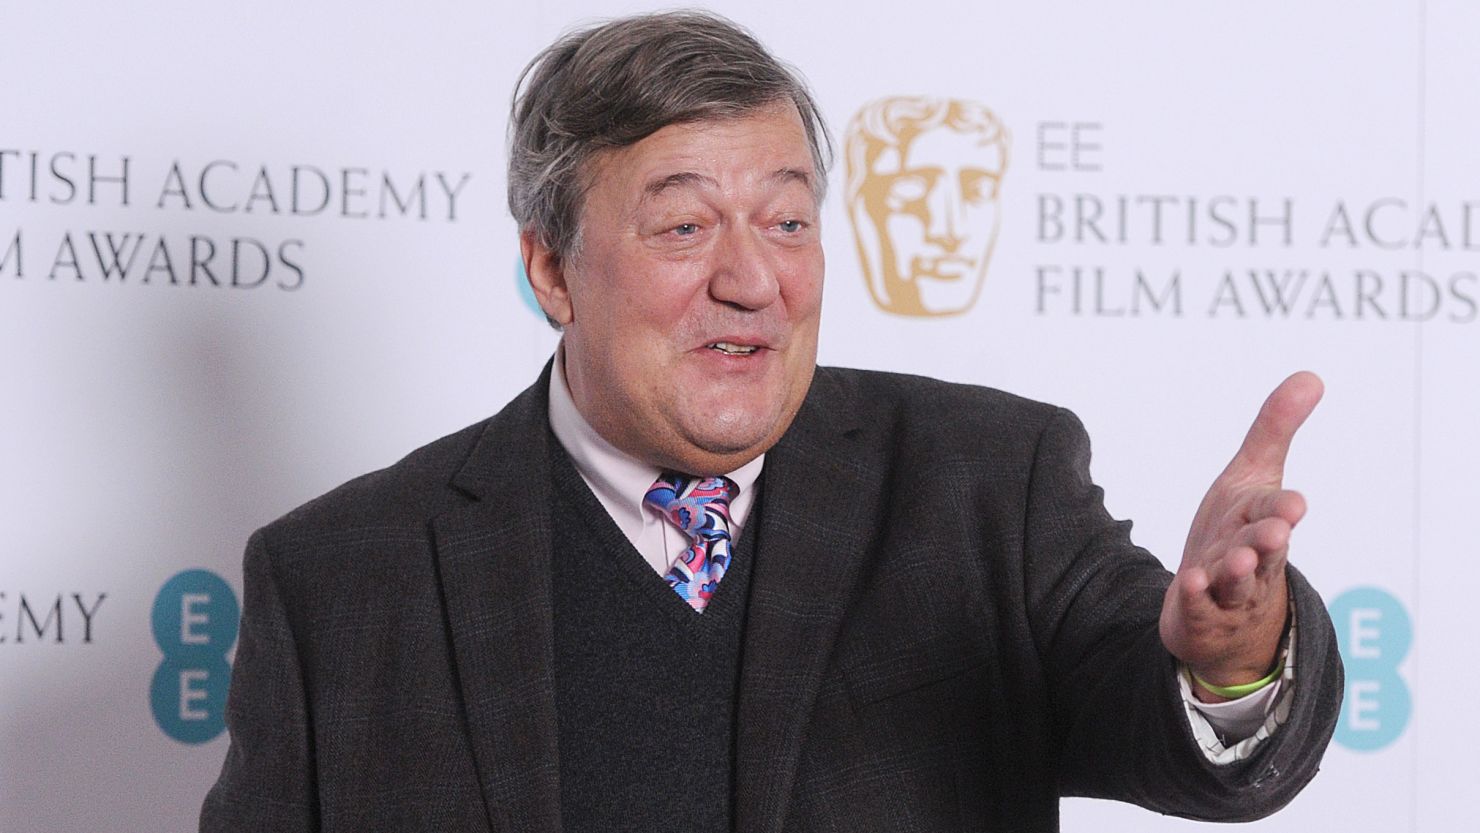 Stephen Fry stepped down as host of the BAFTA Film Awards around the same time as his operation.  